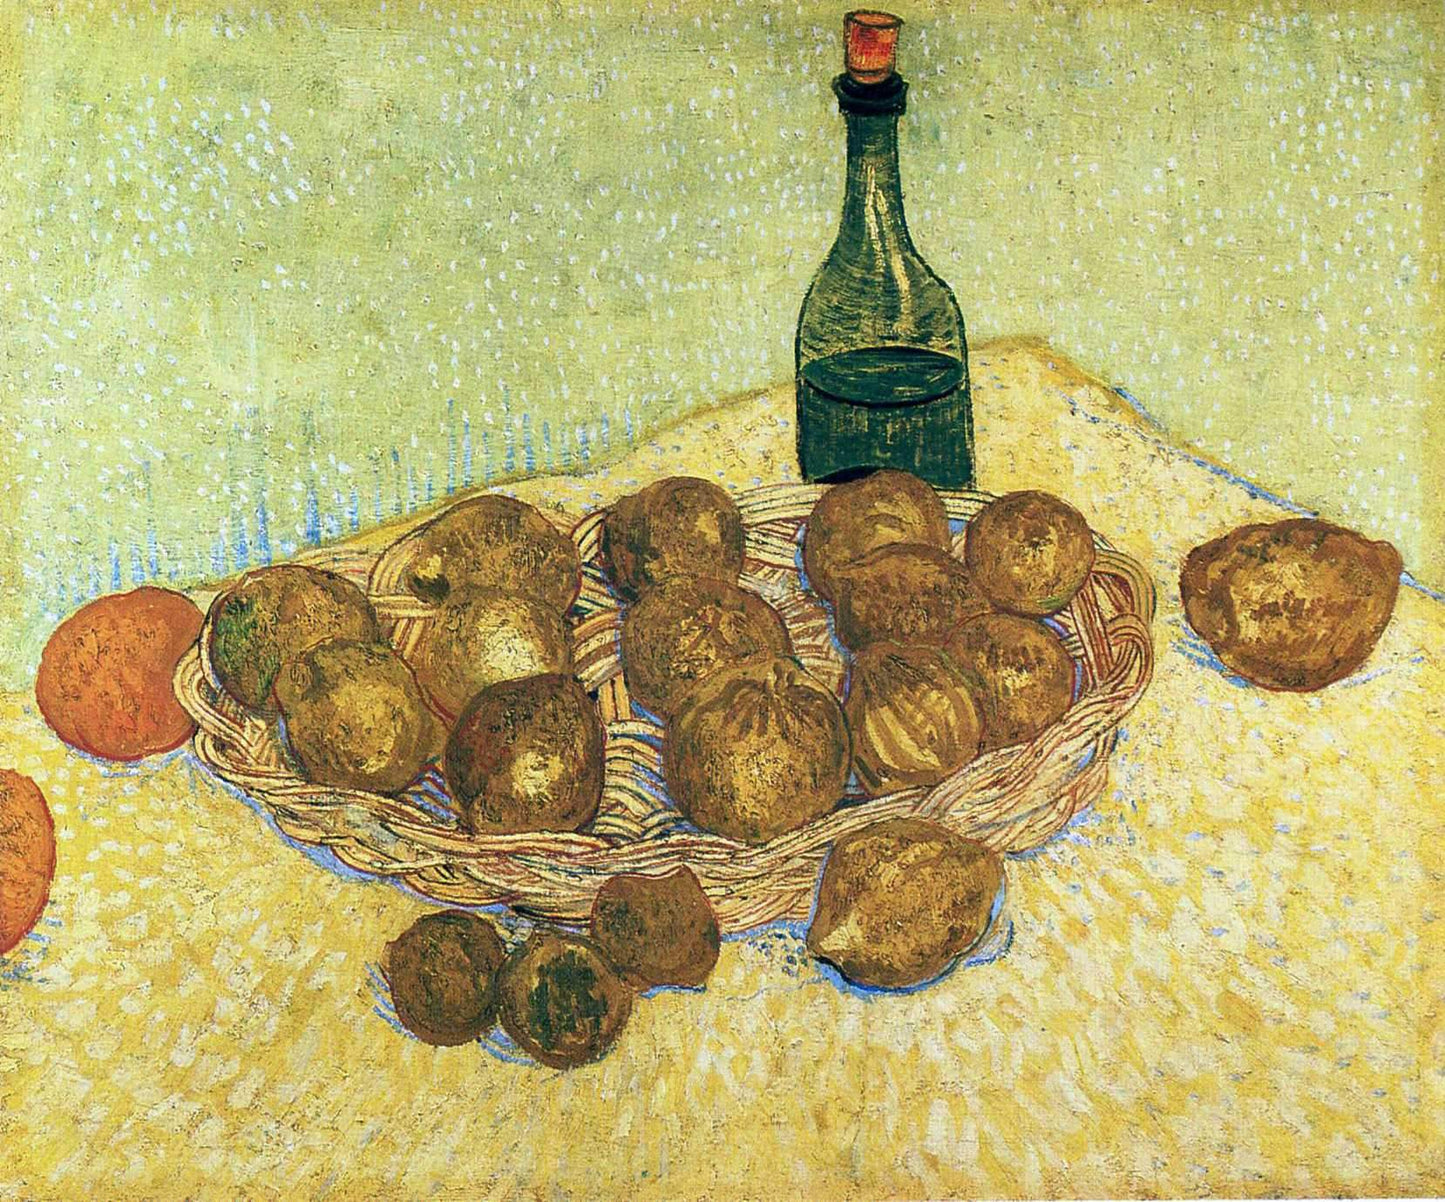 Still Life with a Bottle, Lemons and Oranges,1888